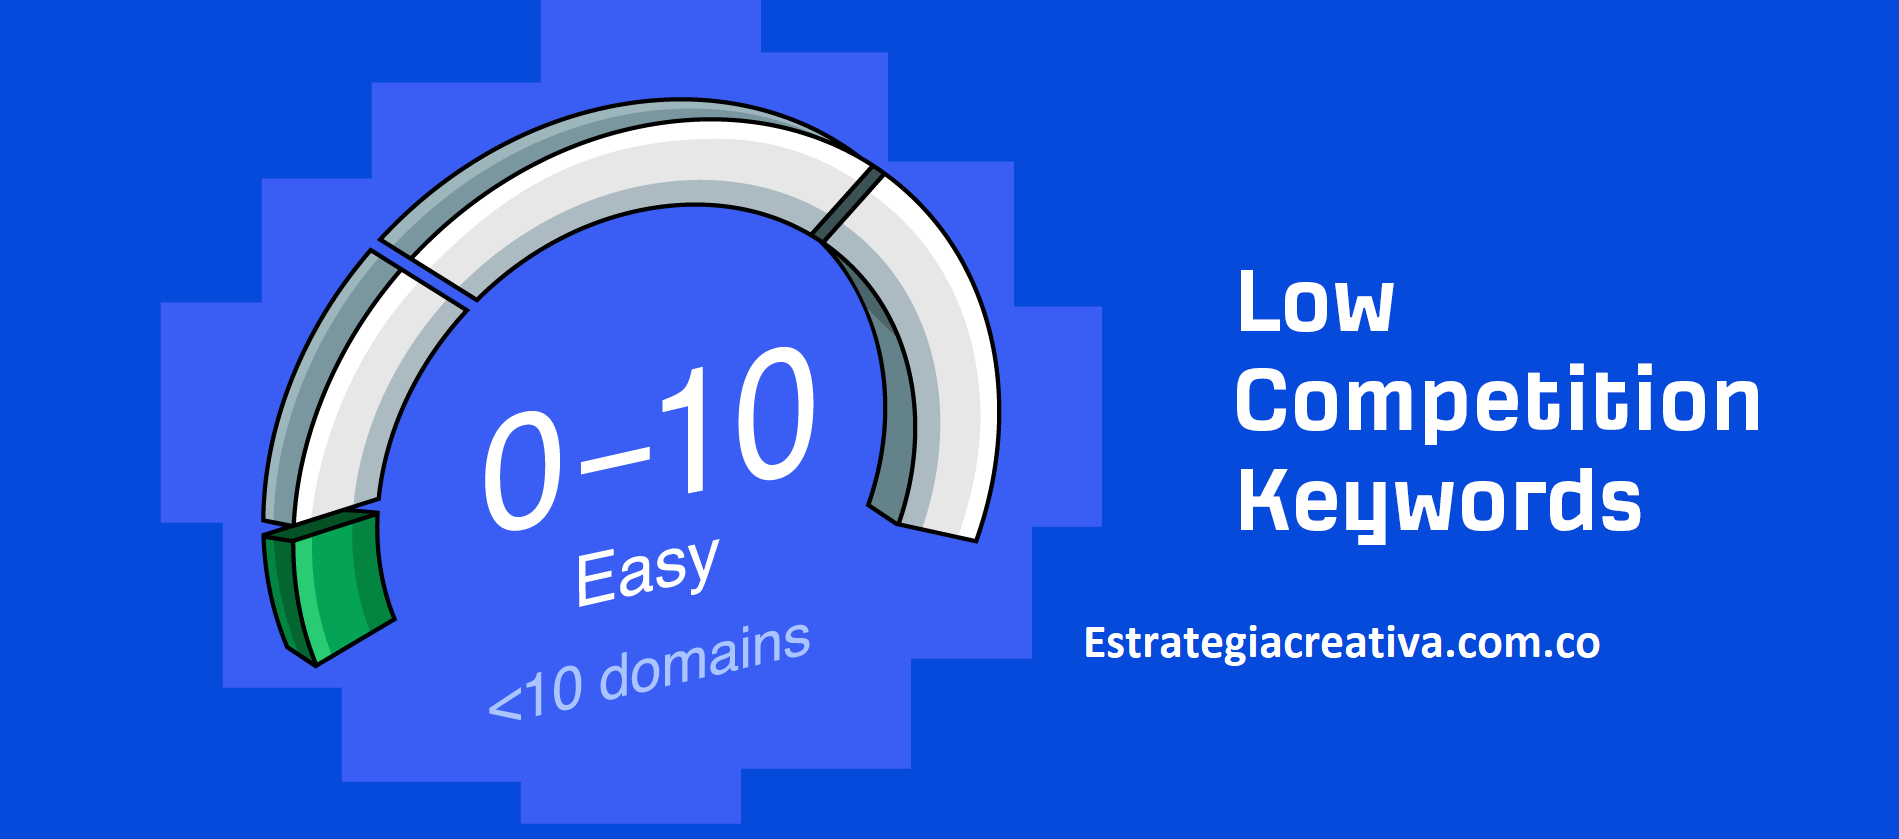 How to find low competition keywords (1)